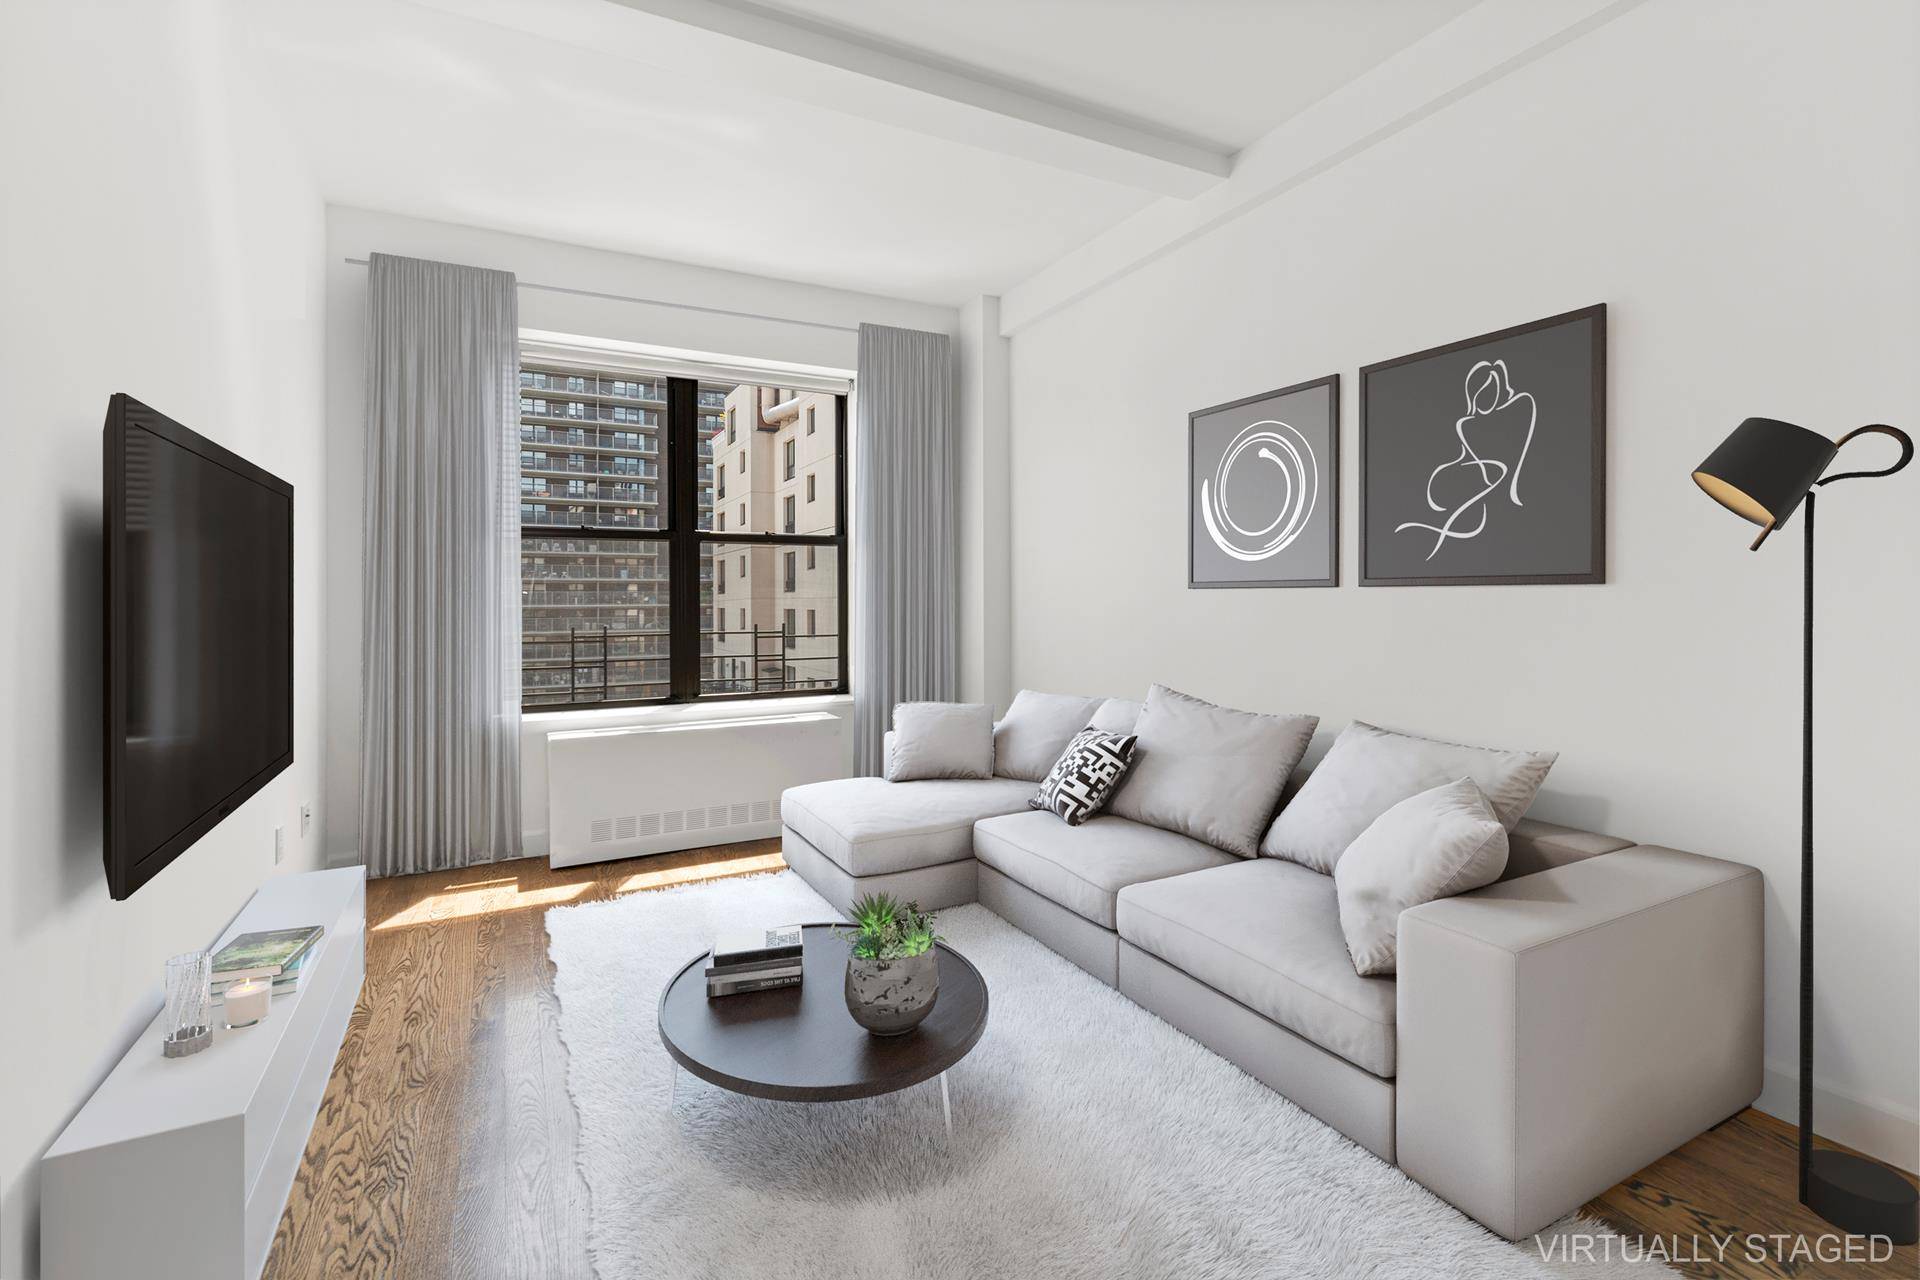 Welcome to The Greystone, a prewar full service building with all amenities in the heart of the Upper West Side.